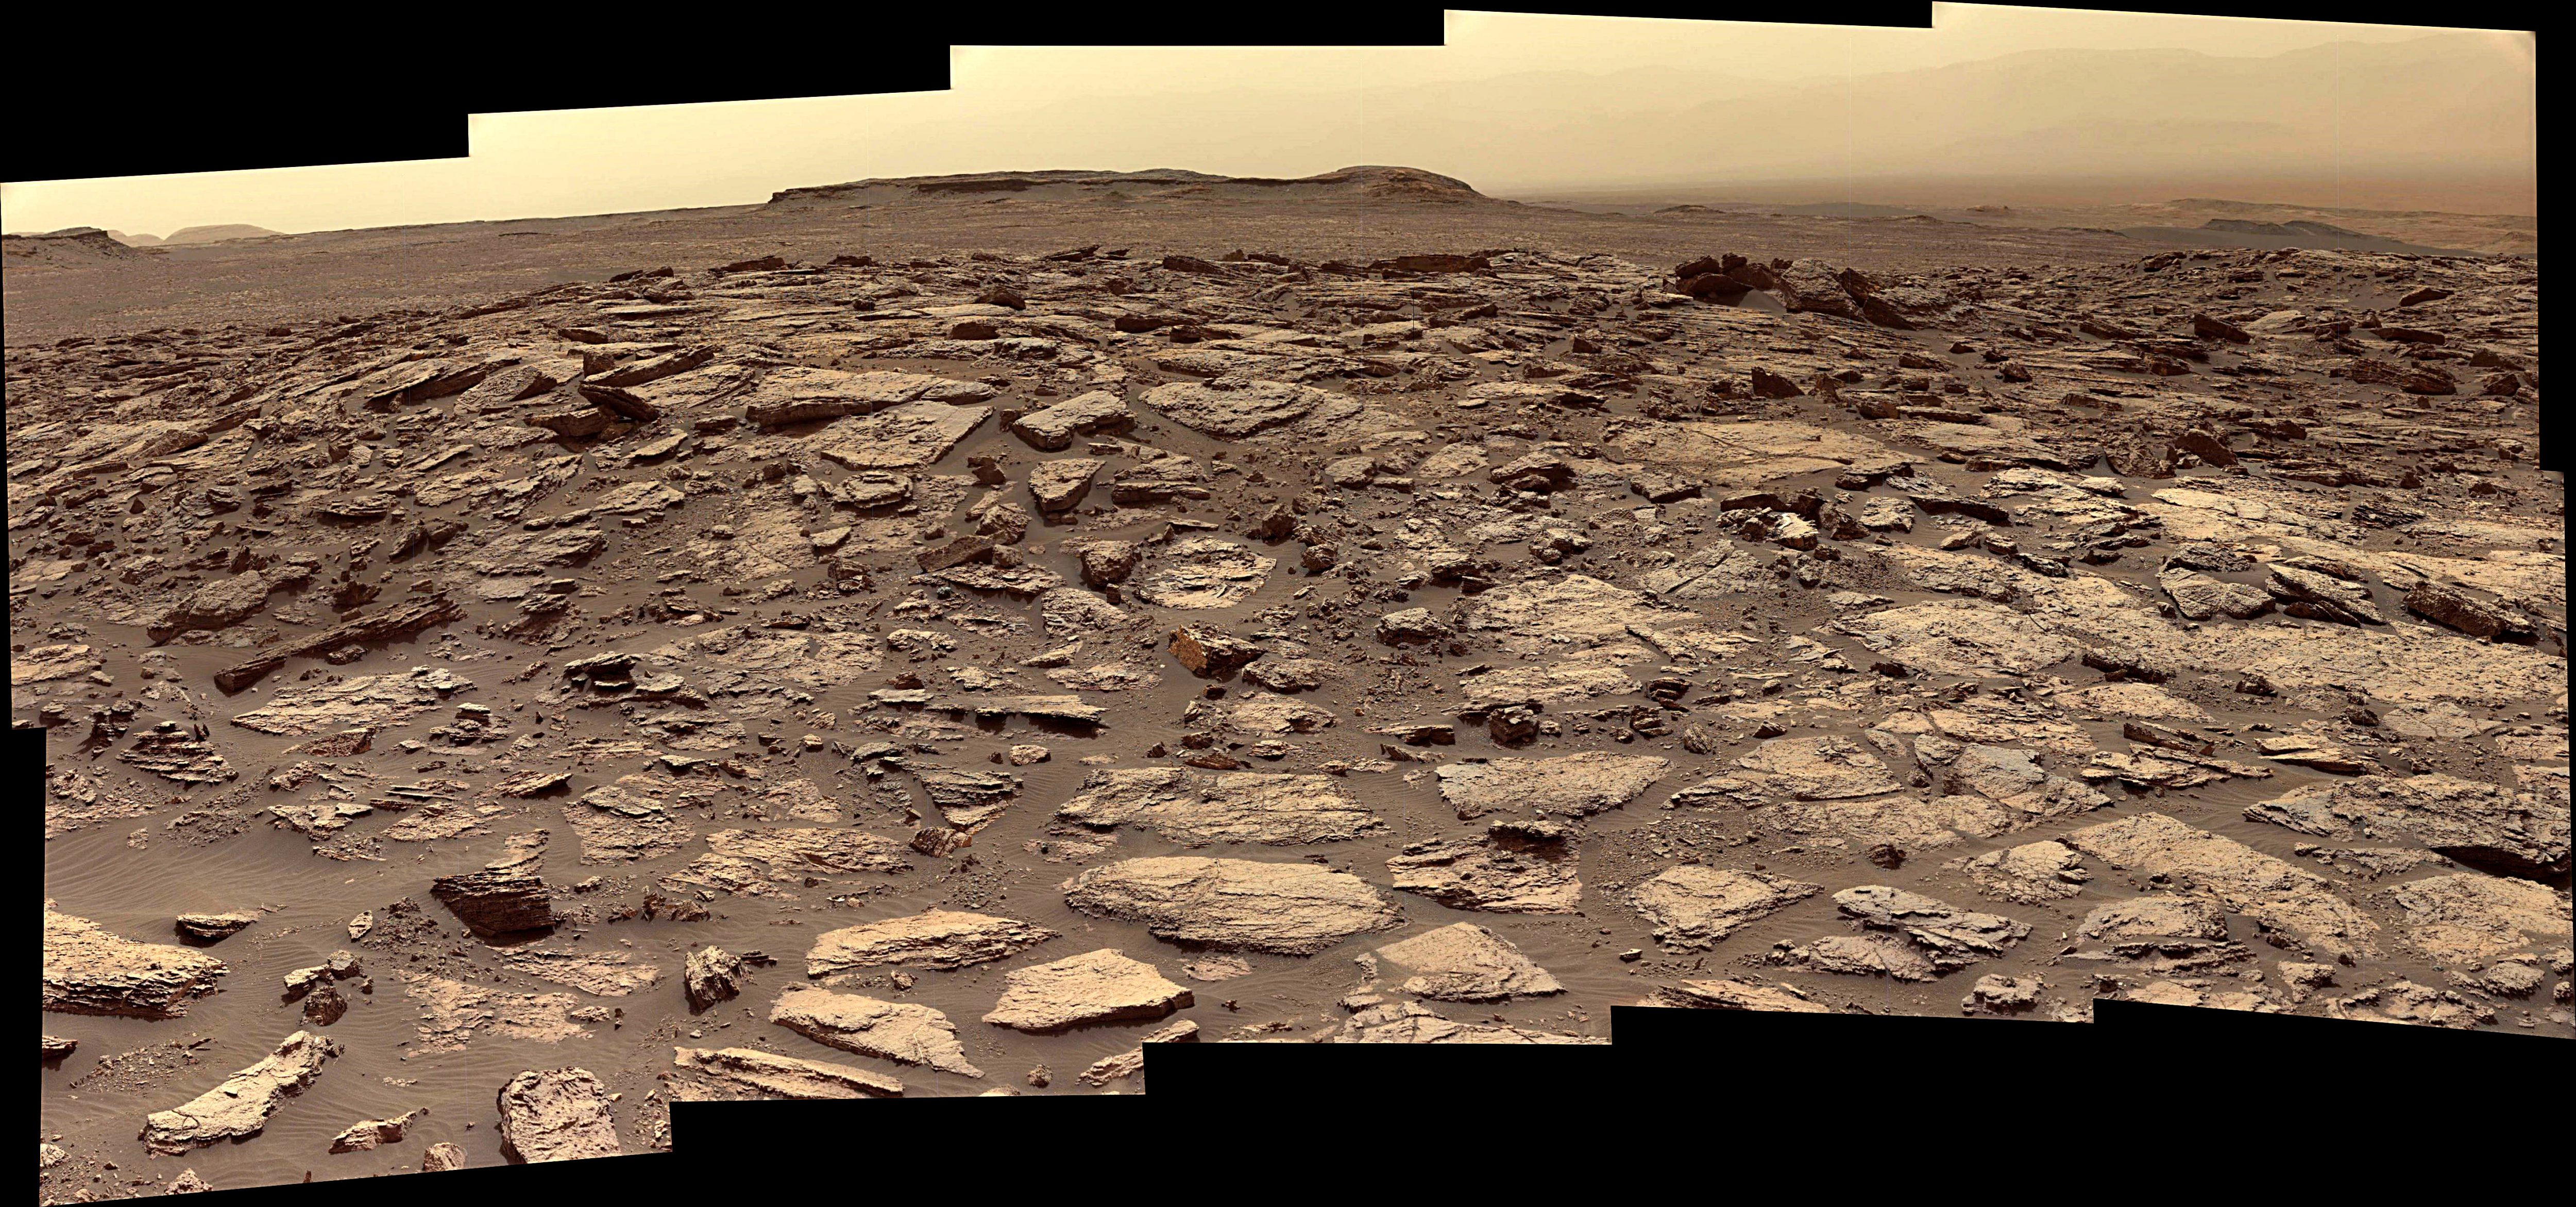 panoramic-curiosity-rover-view-1e-sol-1485-was-life-on-mars